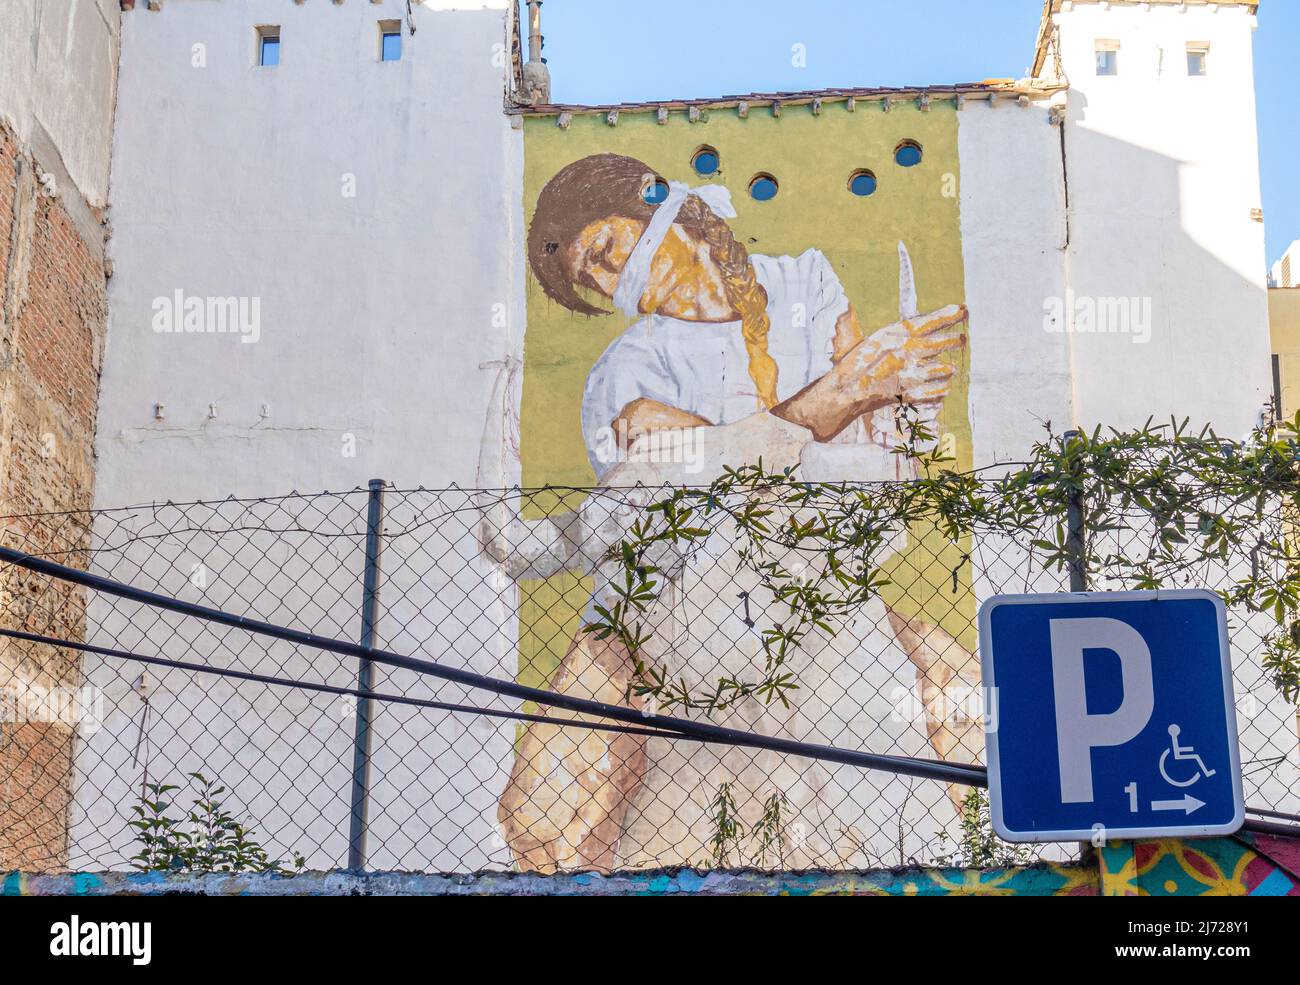 Big feminist mural with gaged woman on her knees by Spanish artist on the wall in Malasana, Madrid, Spain Stock Photo